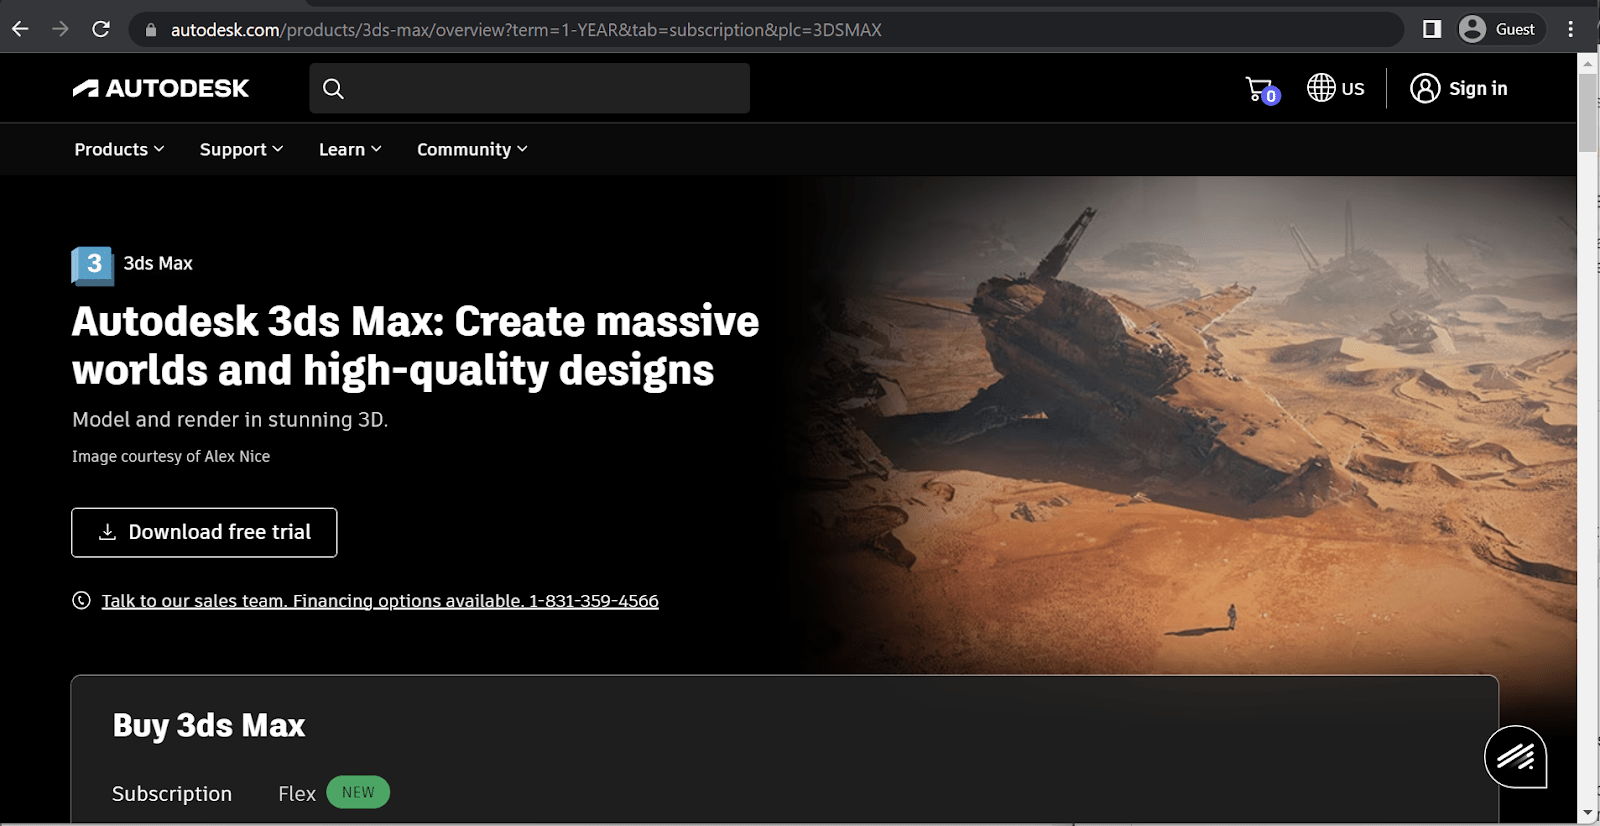 3ds max landing page